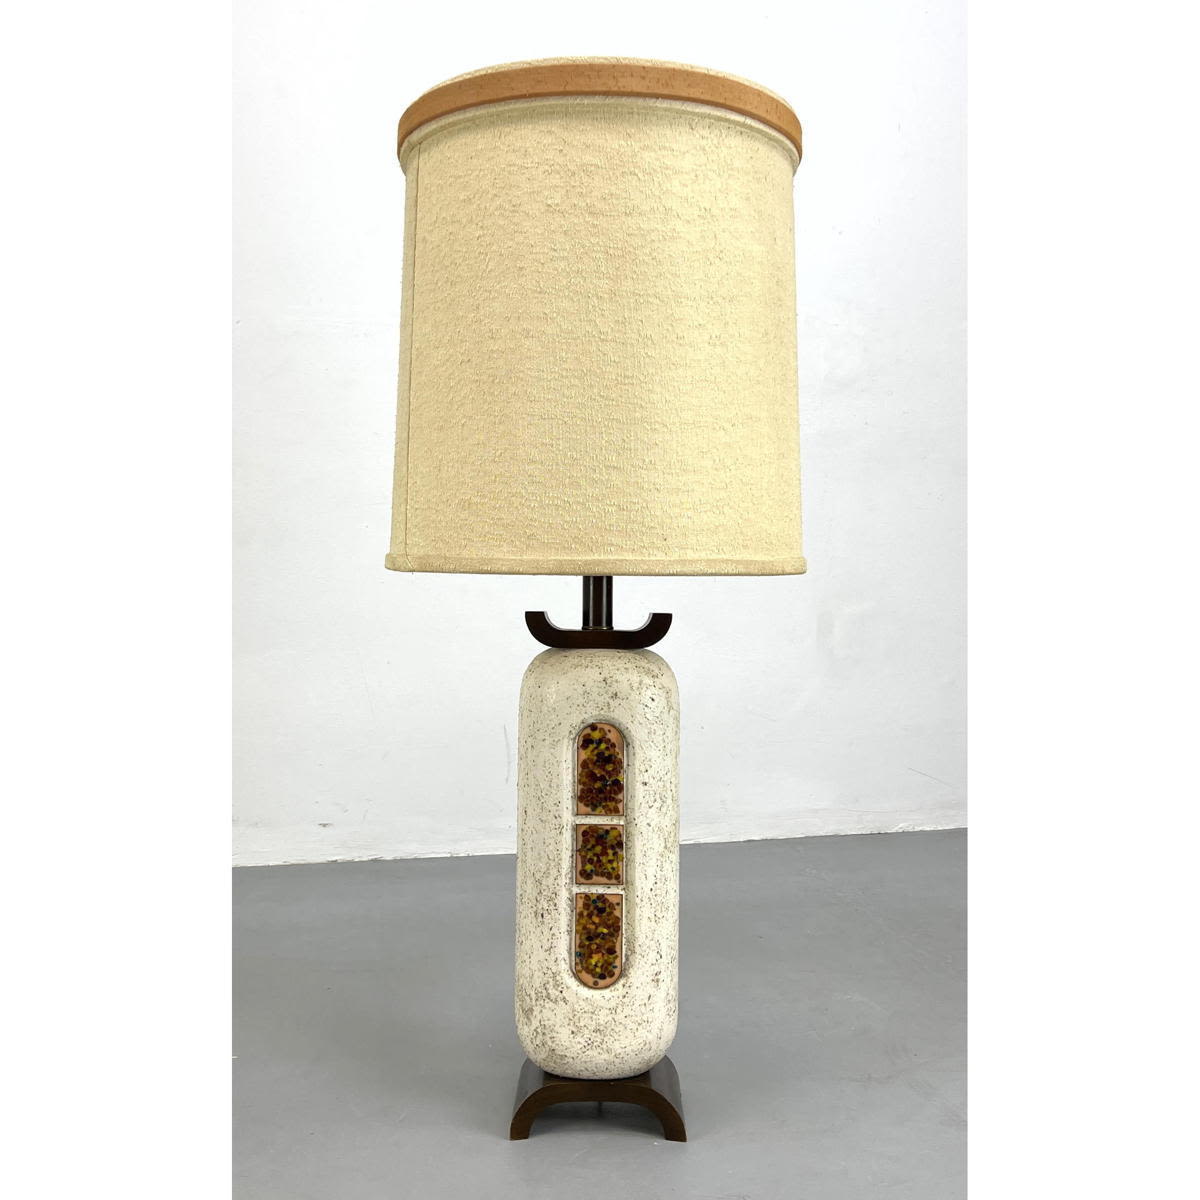 Modernist Pottery Table Lamp Inset 2bae70